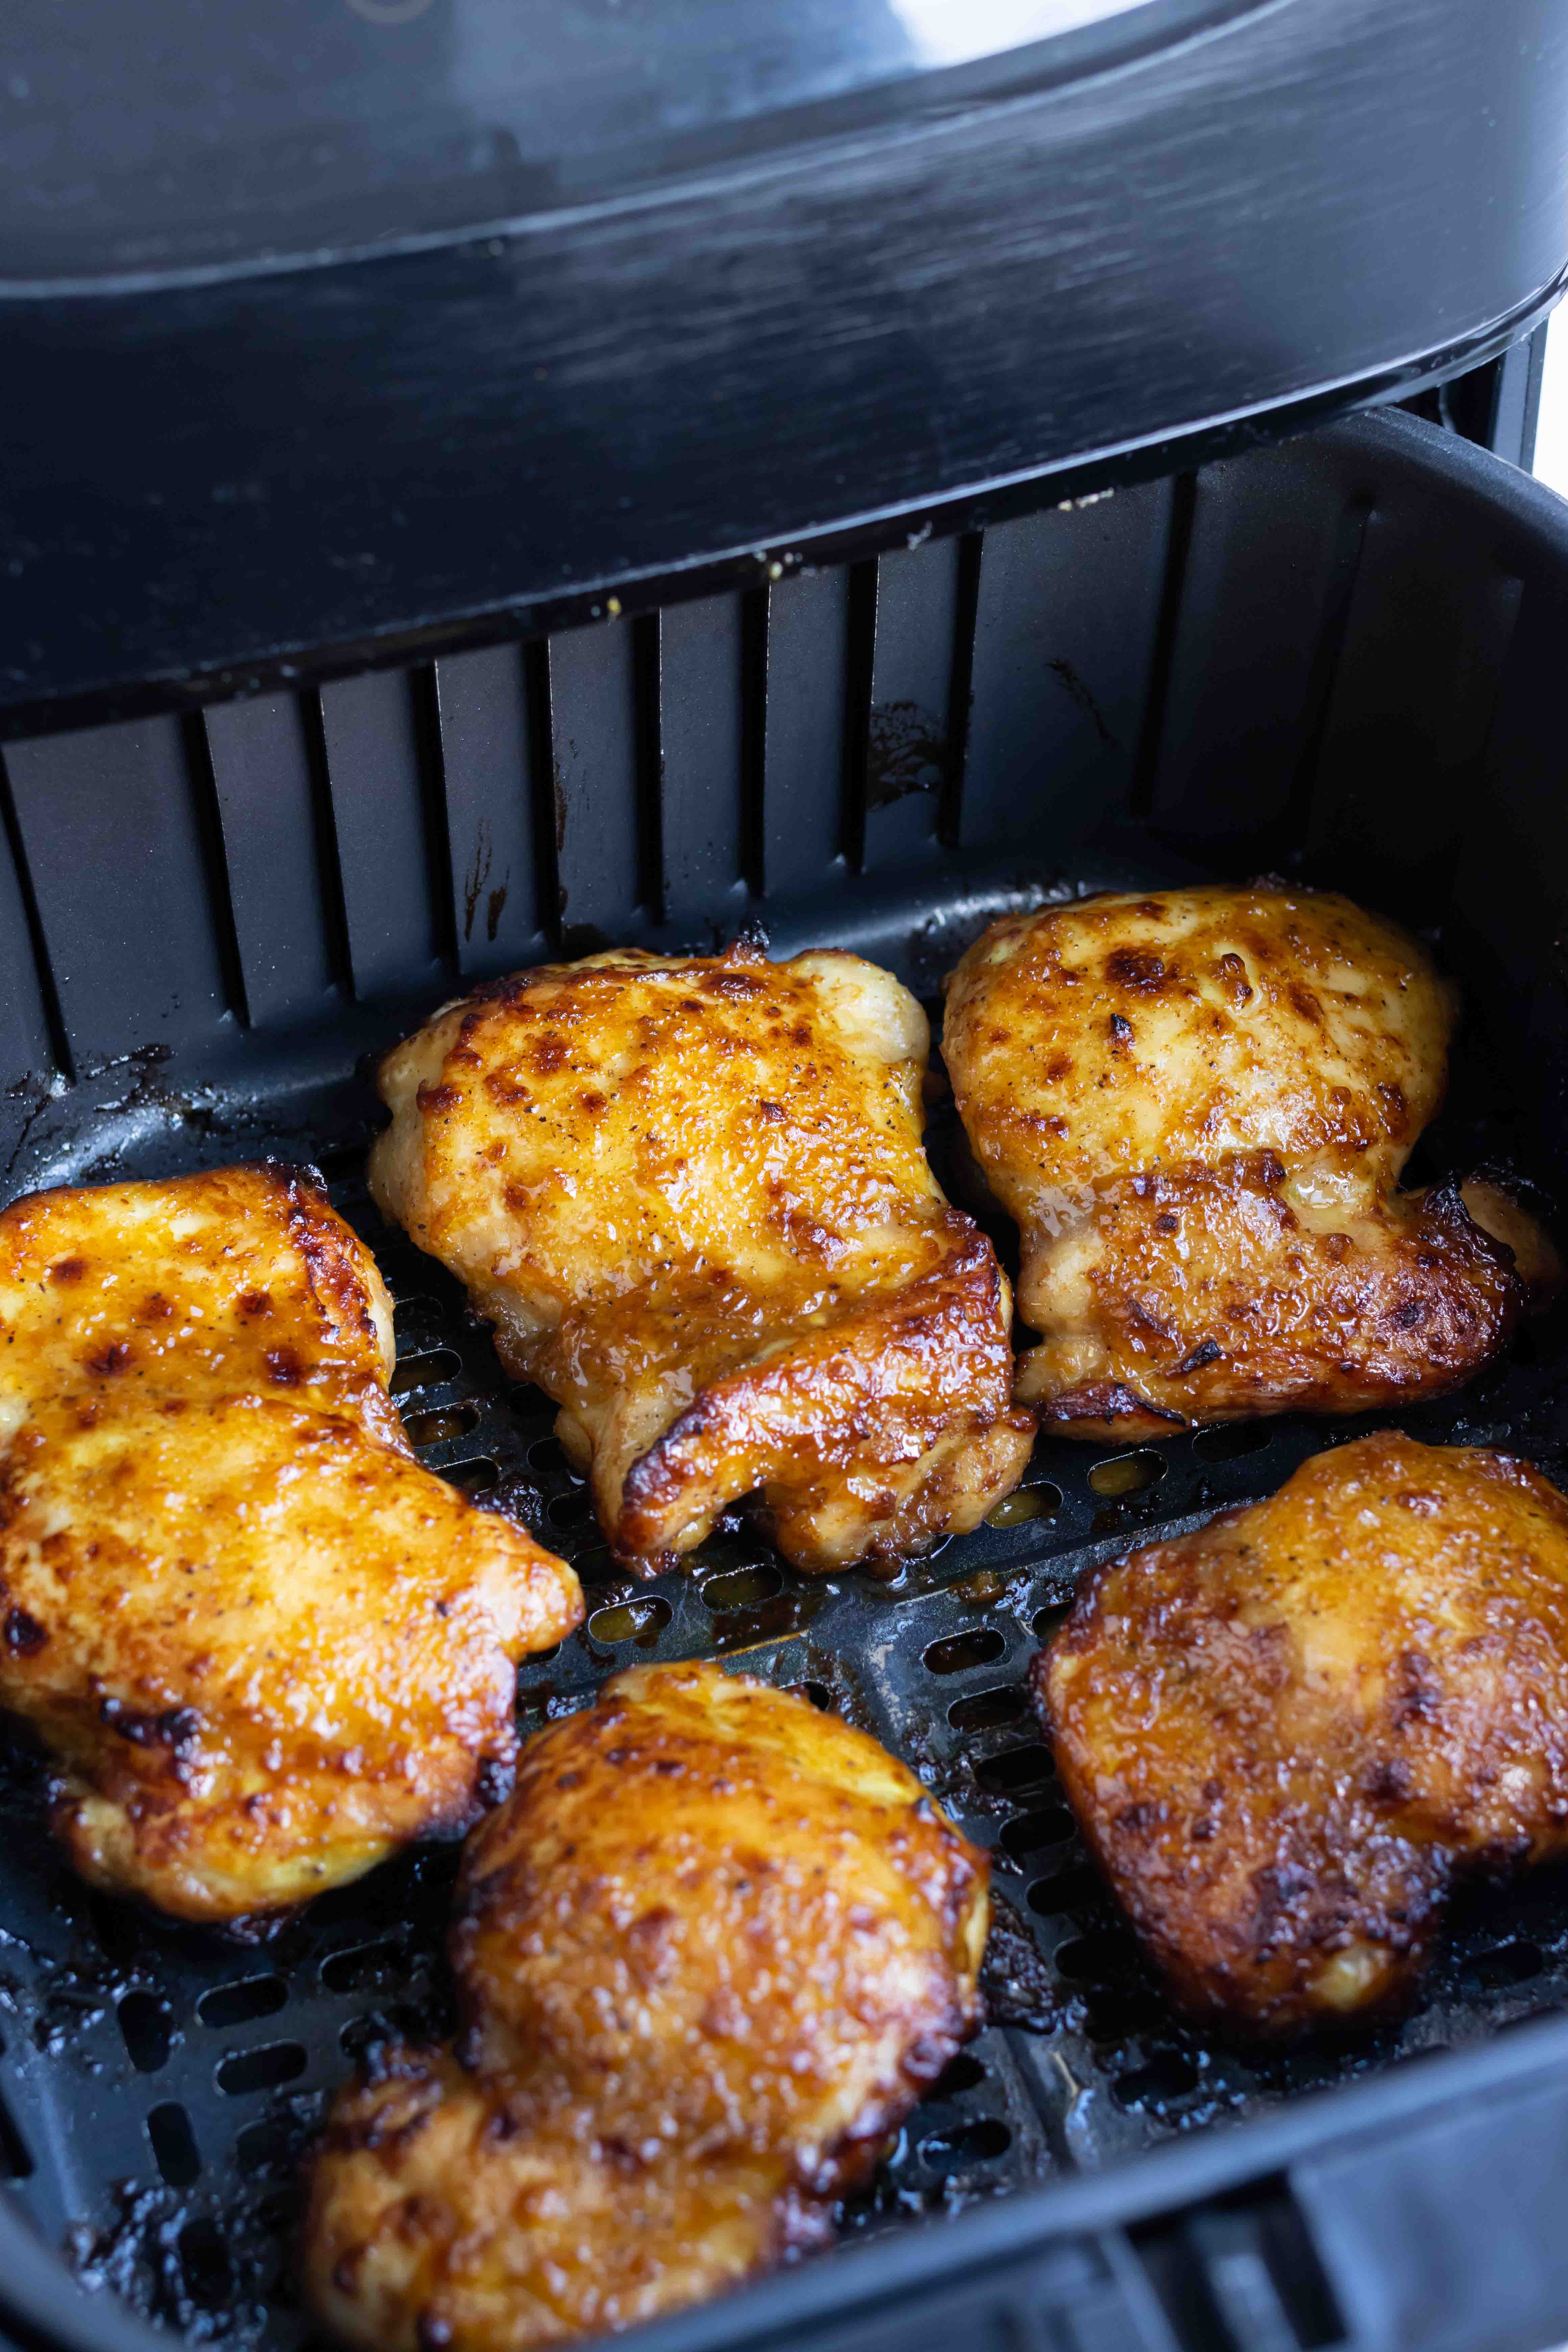 The air fryer gets these chicken thighs crispy yet juicy.